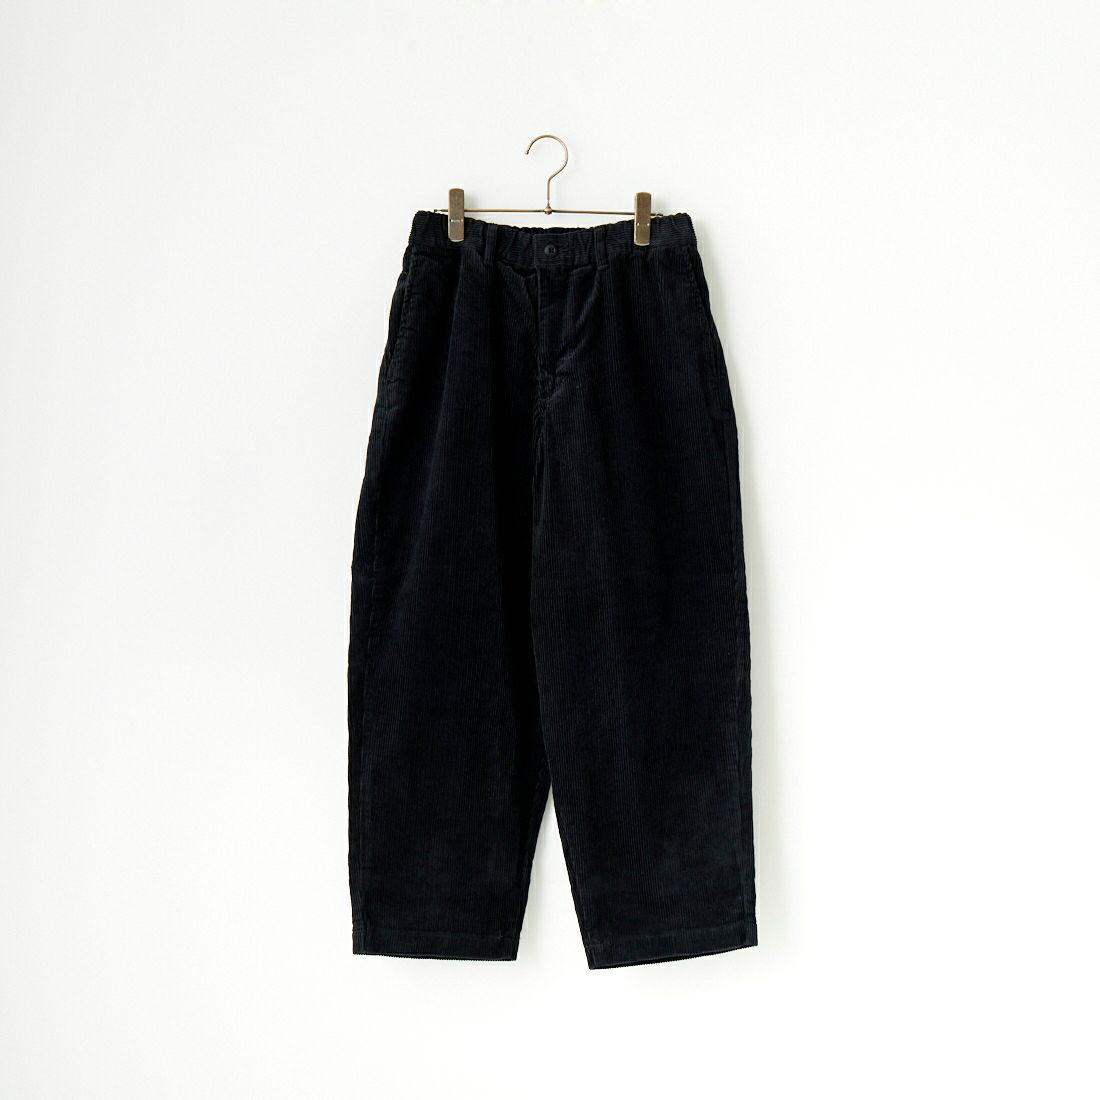 Jeans Factory Clothes [ジーンズファクトリークローズ] STANDARD 8W 